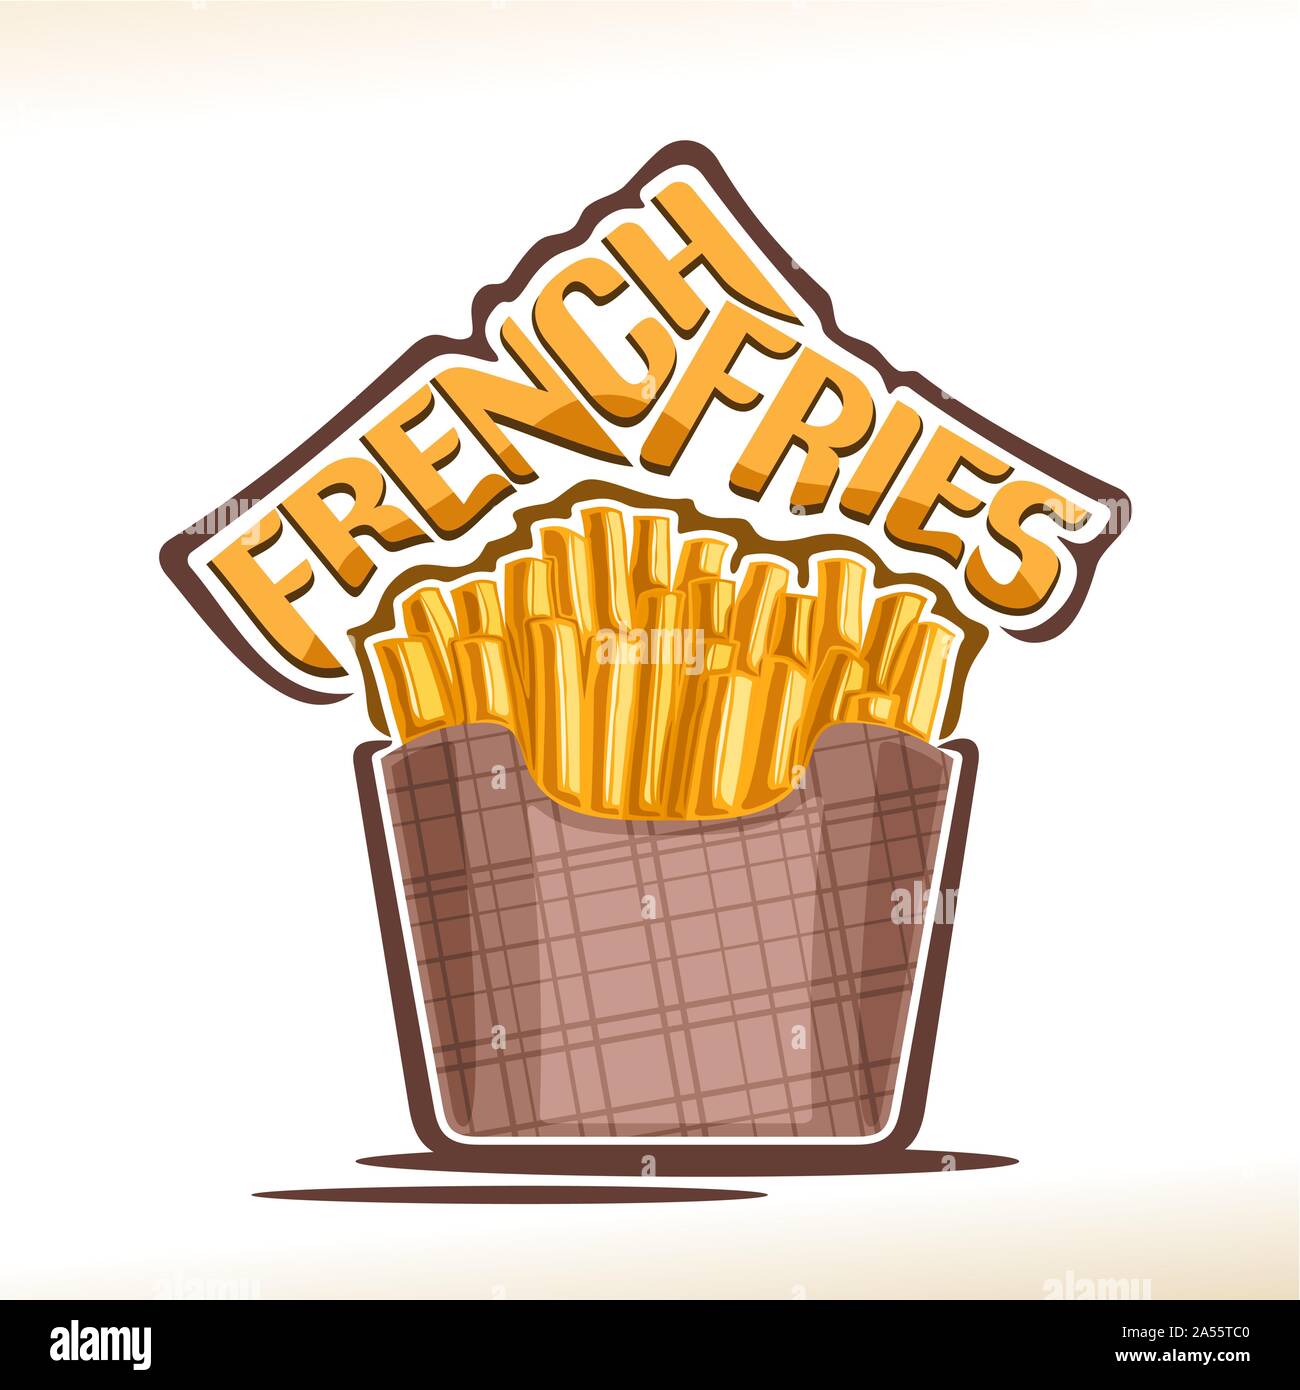 Vector logo for French Fries, poster with fried crunchy potato sticks in brown pack, original typeface for words french fries, isolated illustration o Stock Vector